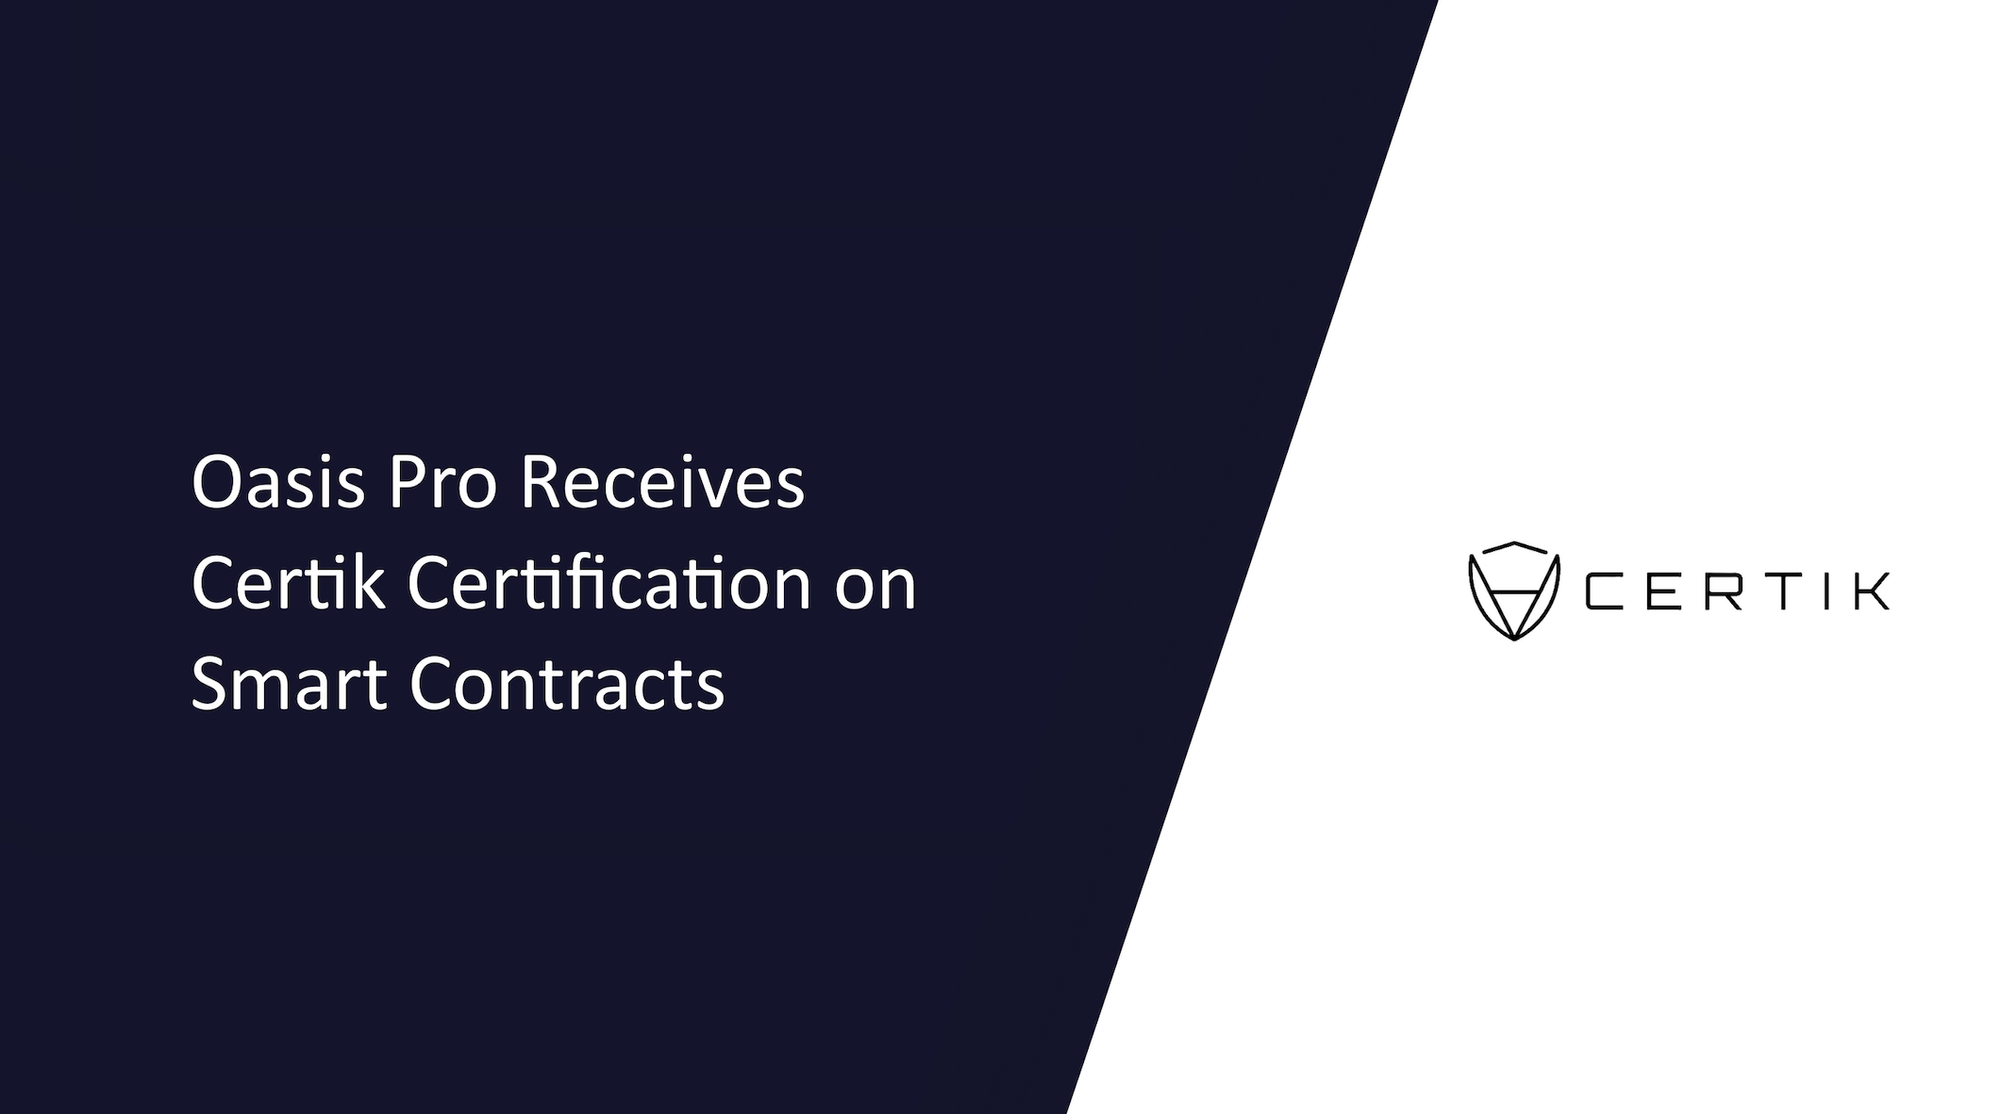 Oasis Pro Receives Certik Certifications on Smart Contracts